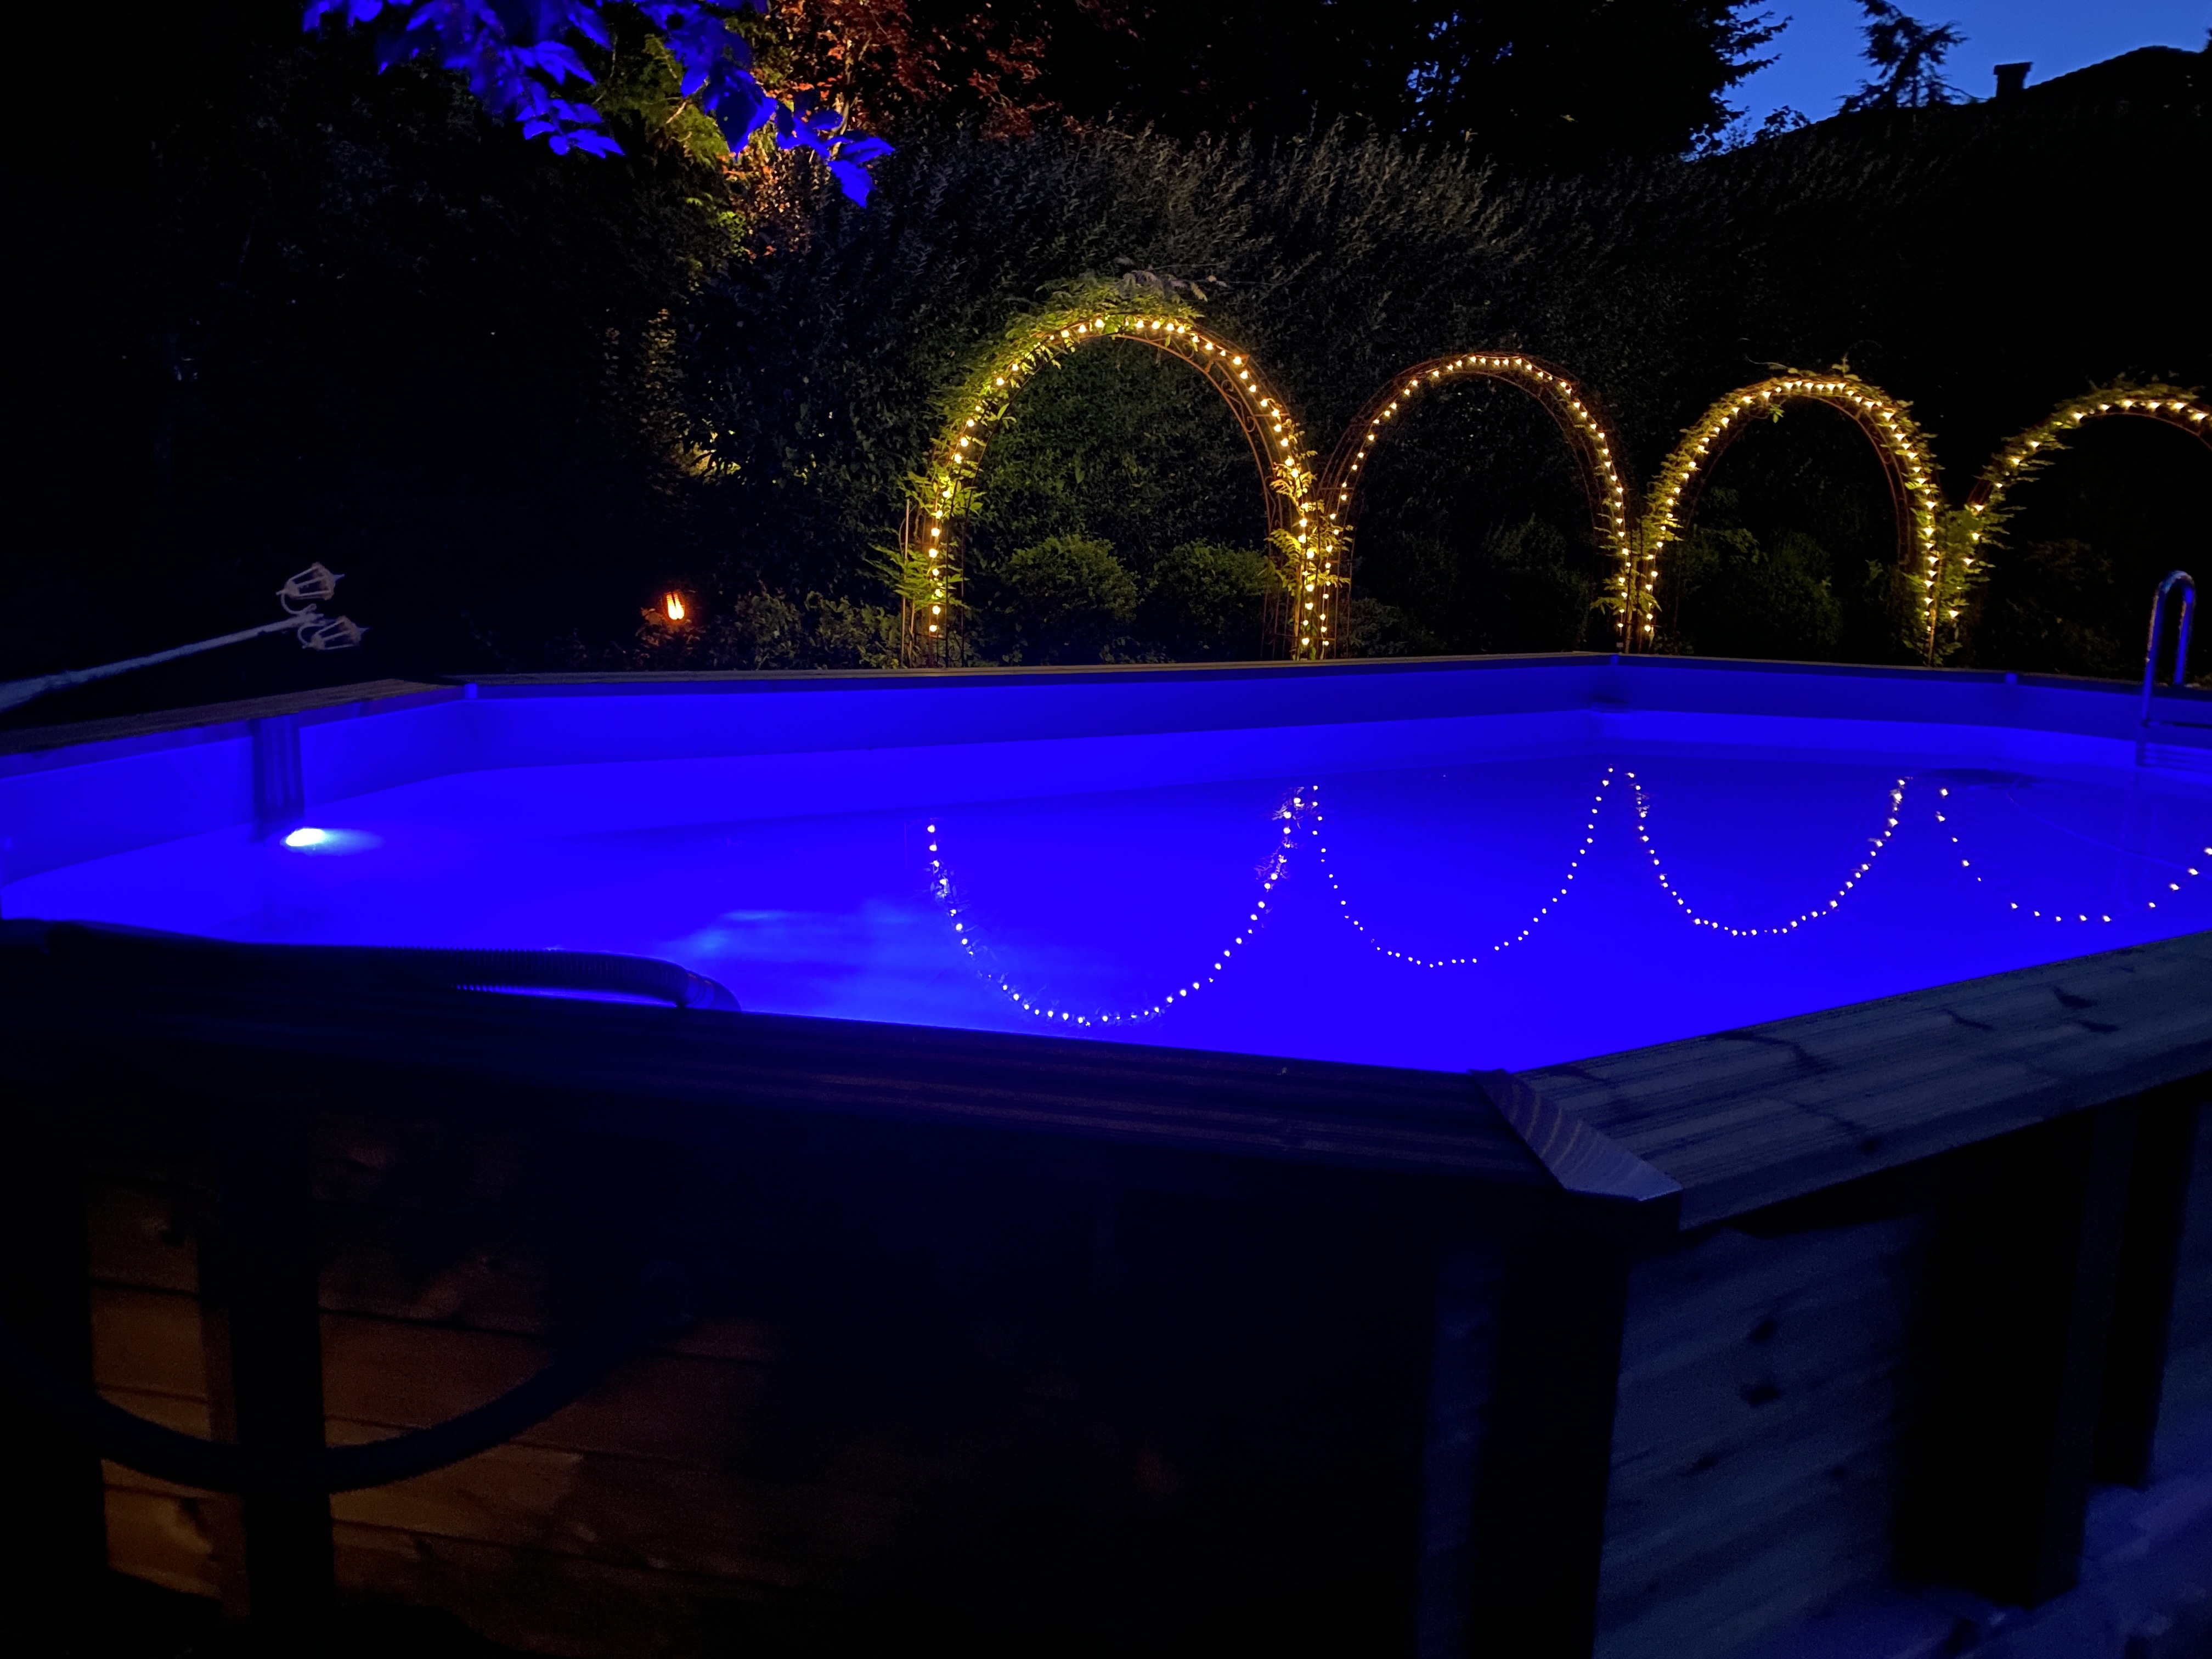 Schwimmbad Beleuchtung mit LED